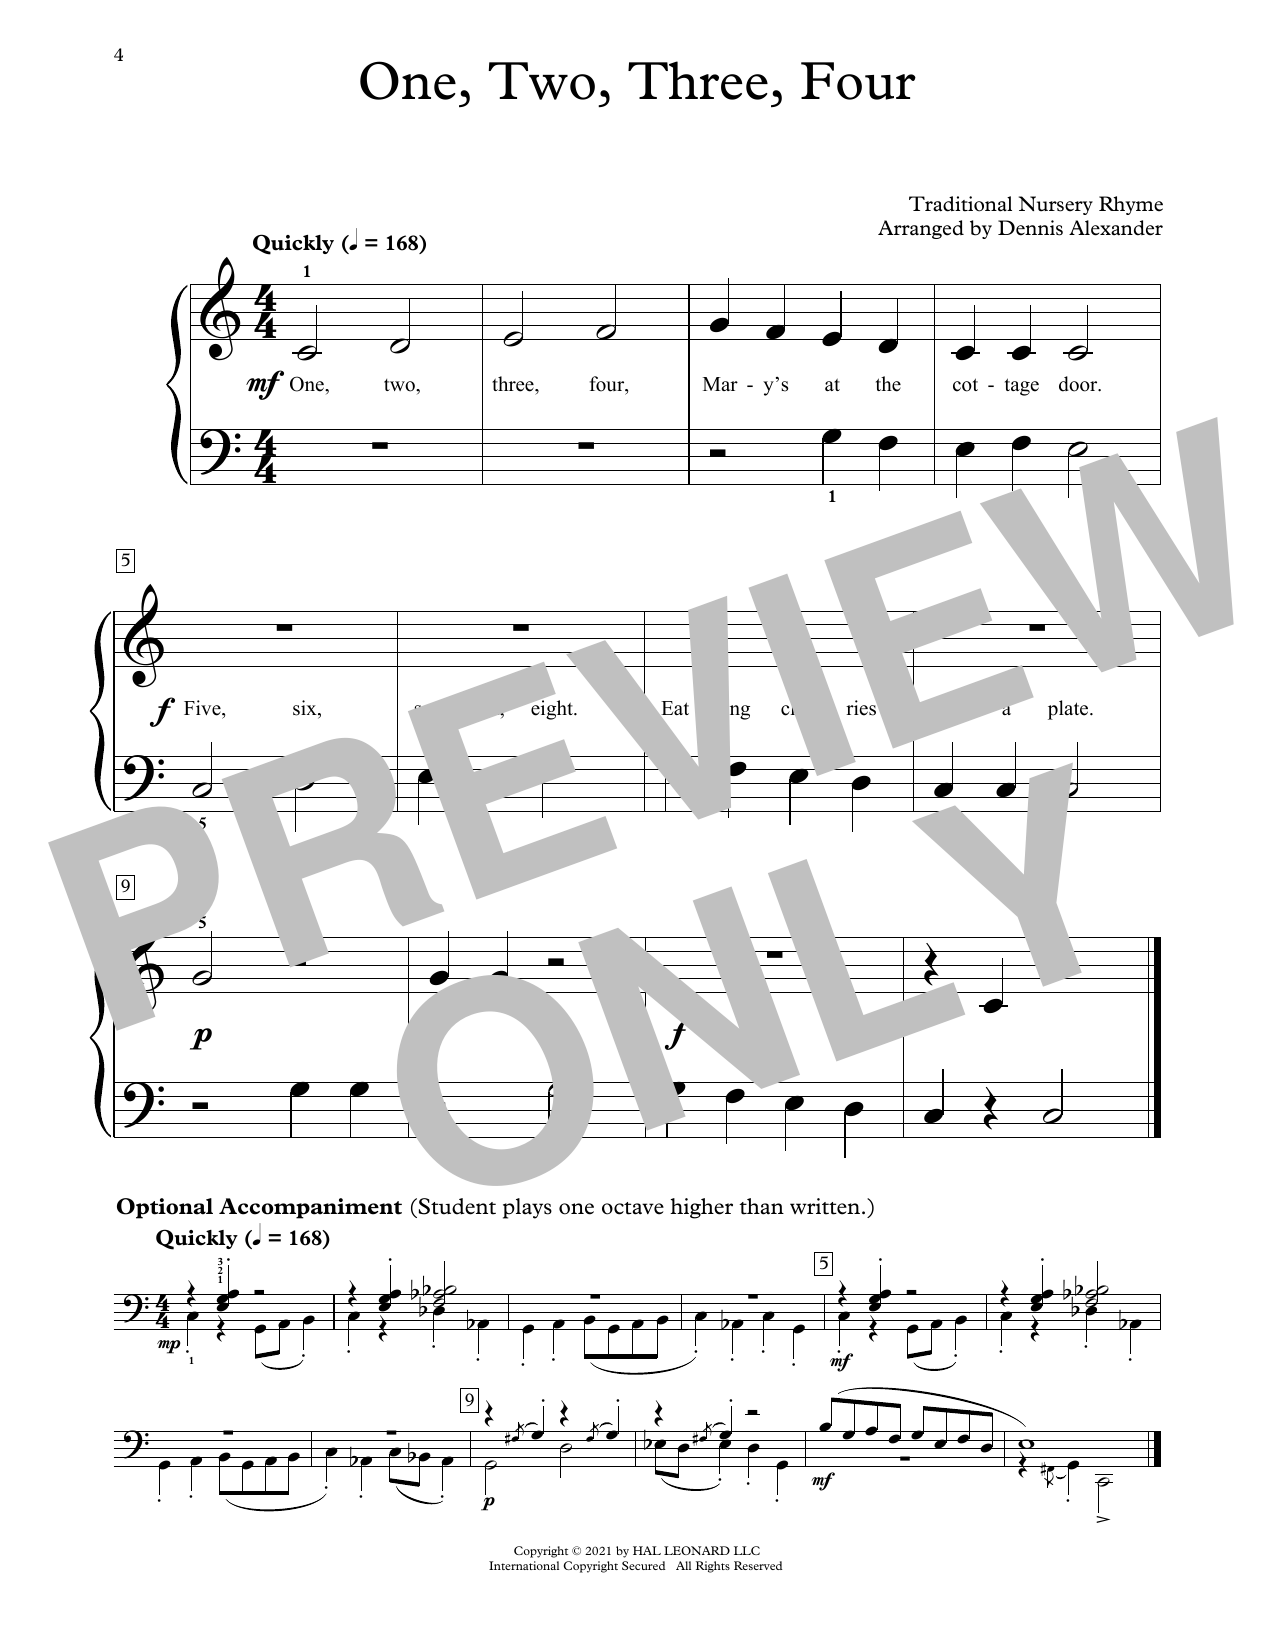 Download Traditional Nursery Rhyme One, Two, Three, Four Sheet Music